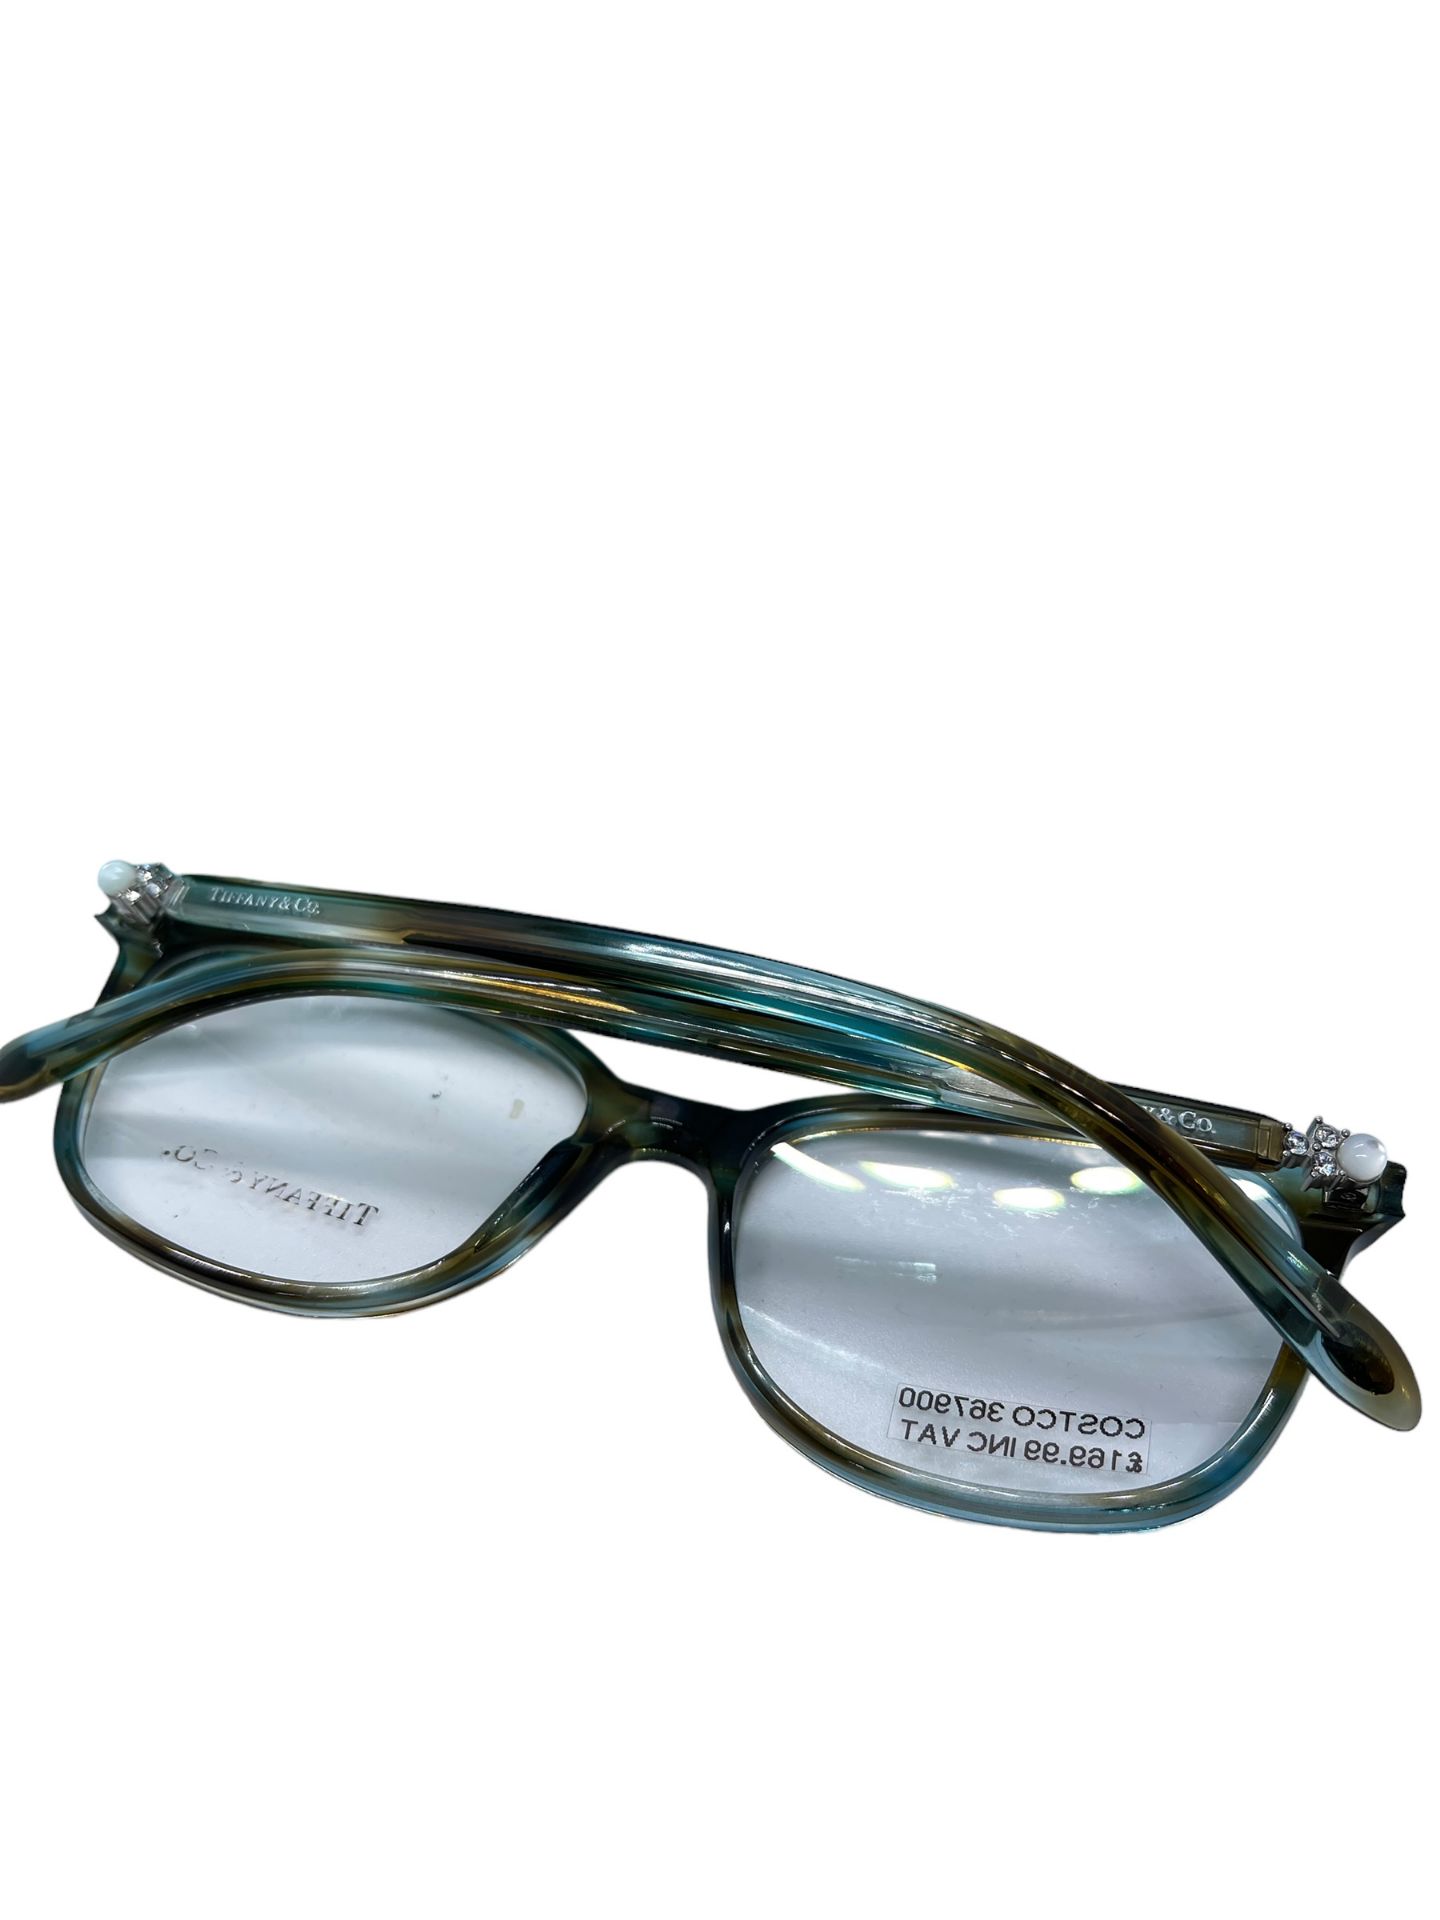 Tiffany spectacles demo ladies - Image 6 of 6